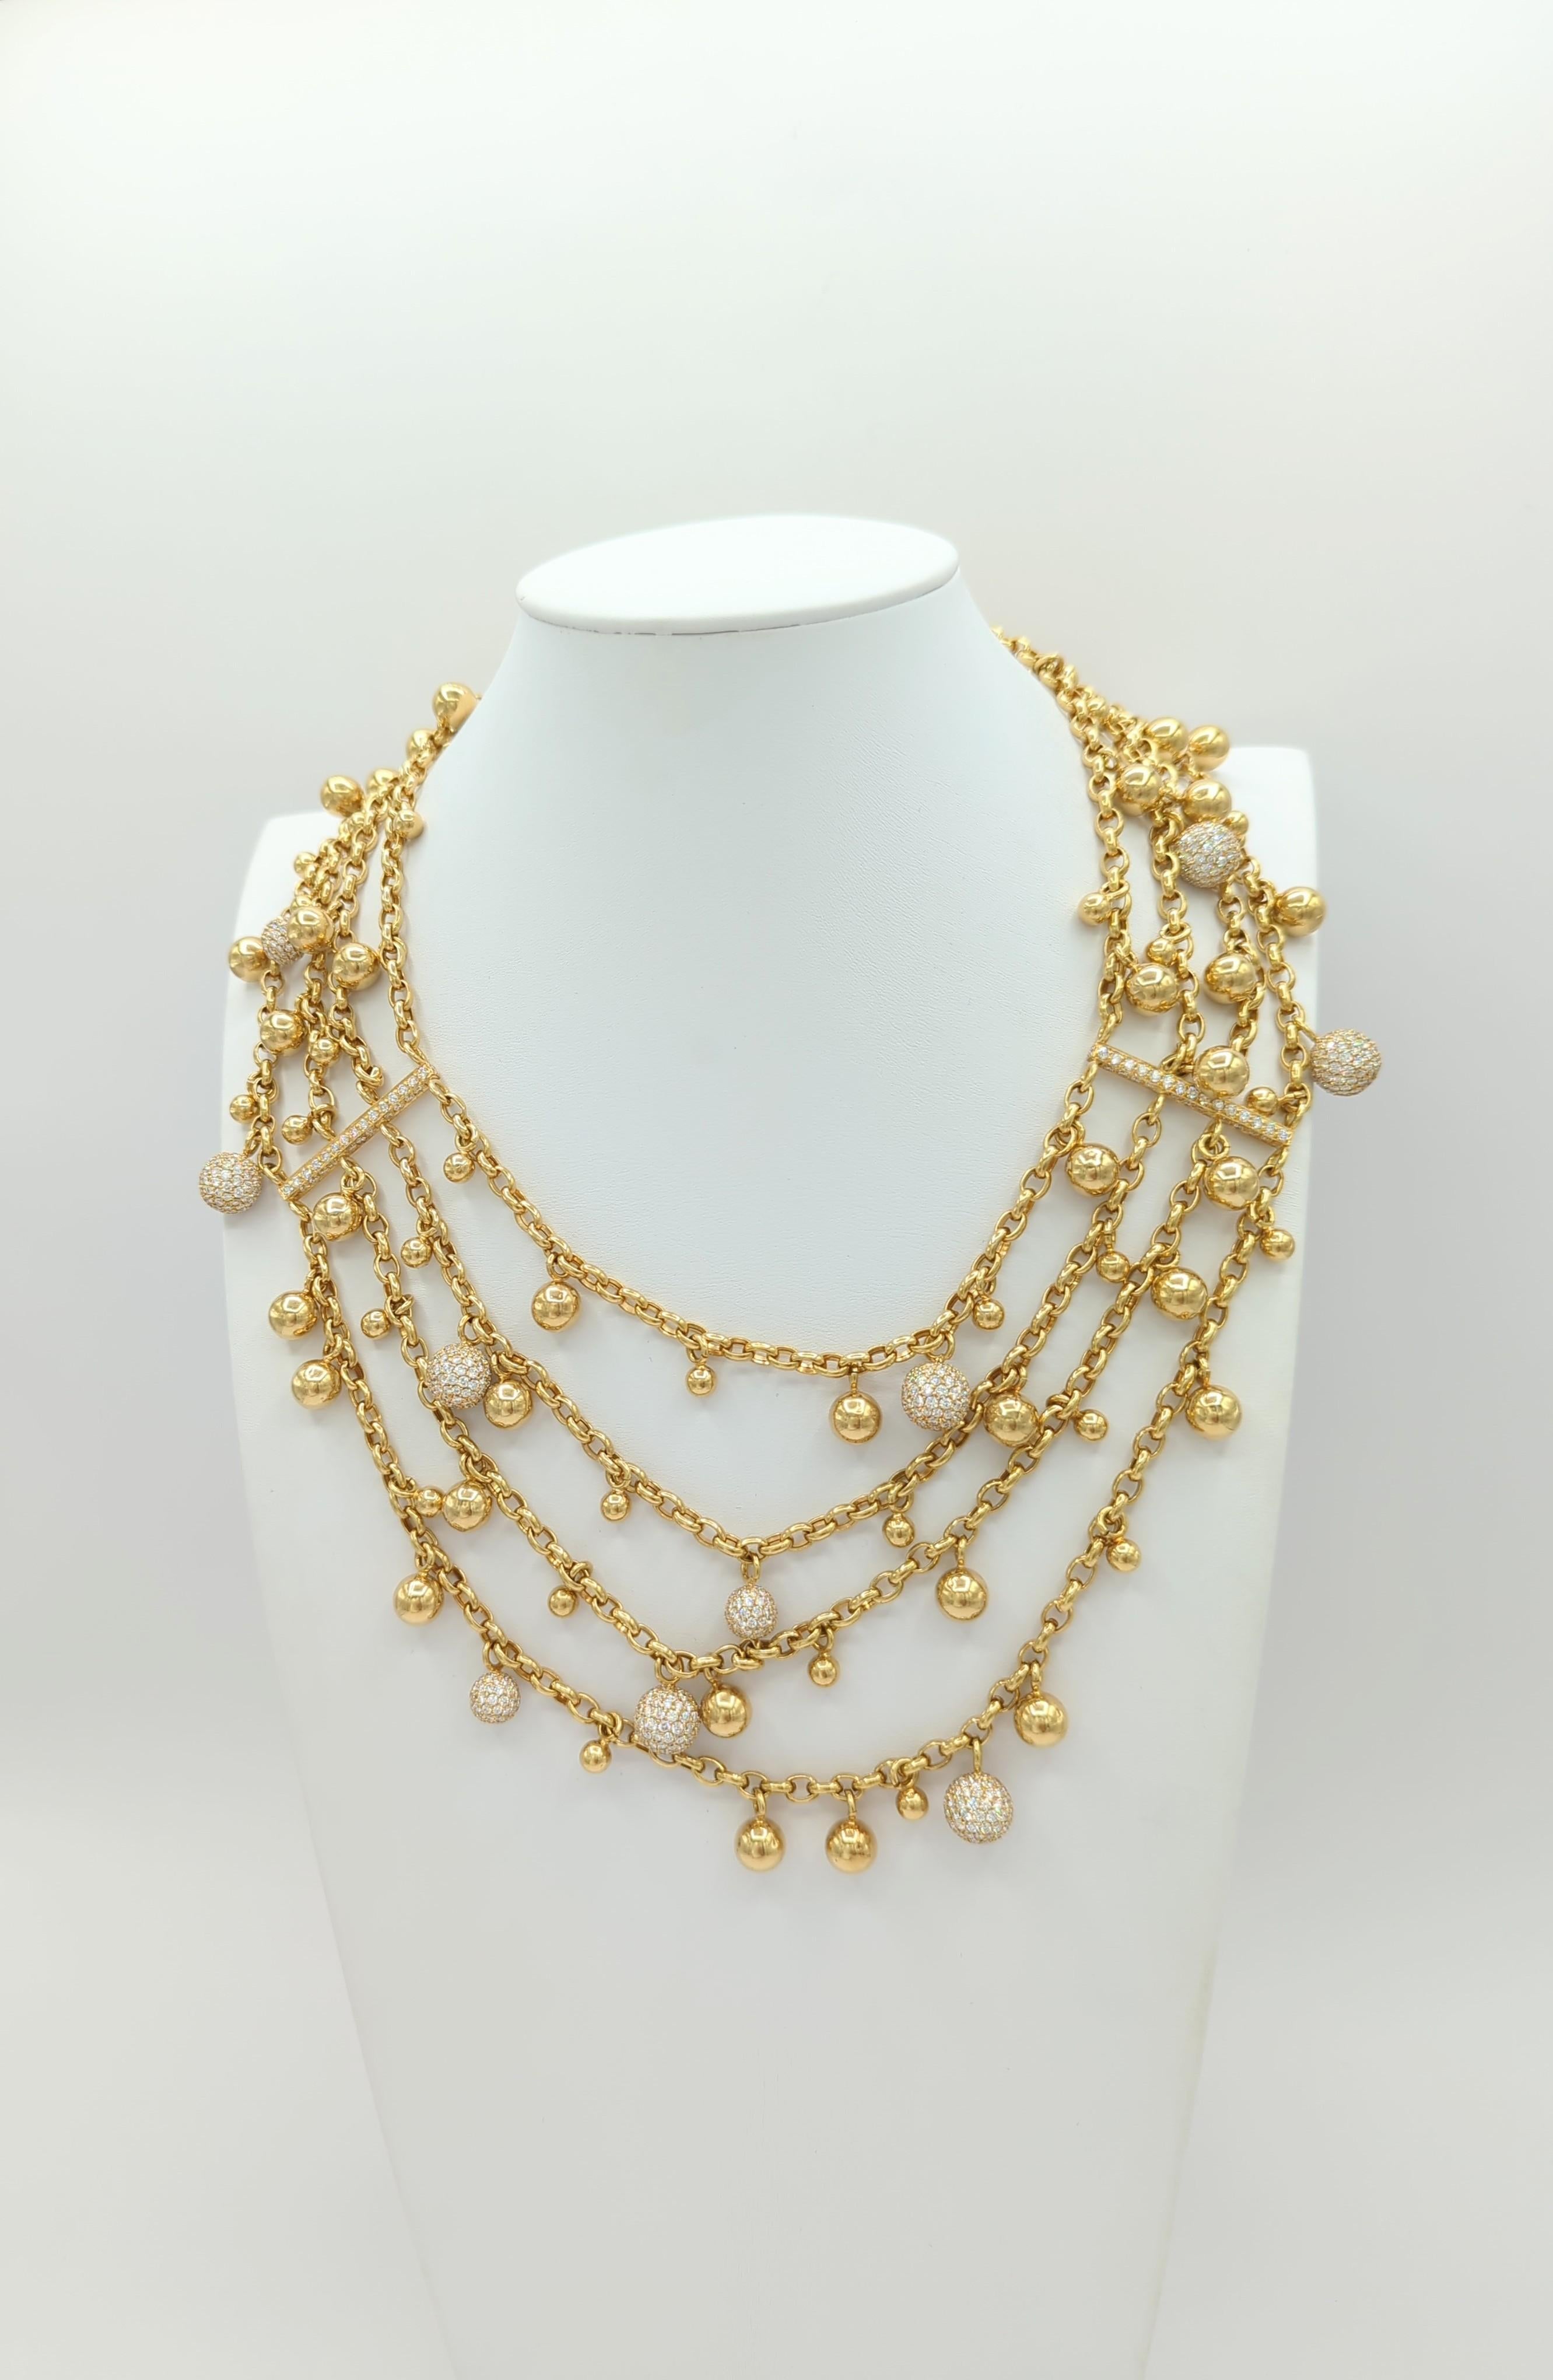 Estate Tallarico Pave Diamond Balls Chunky Necklace and Bracelet Set in 18K  In New Condition For Sale In Los Angeles, CA